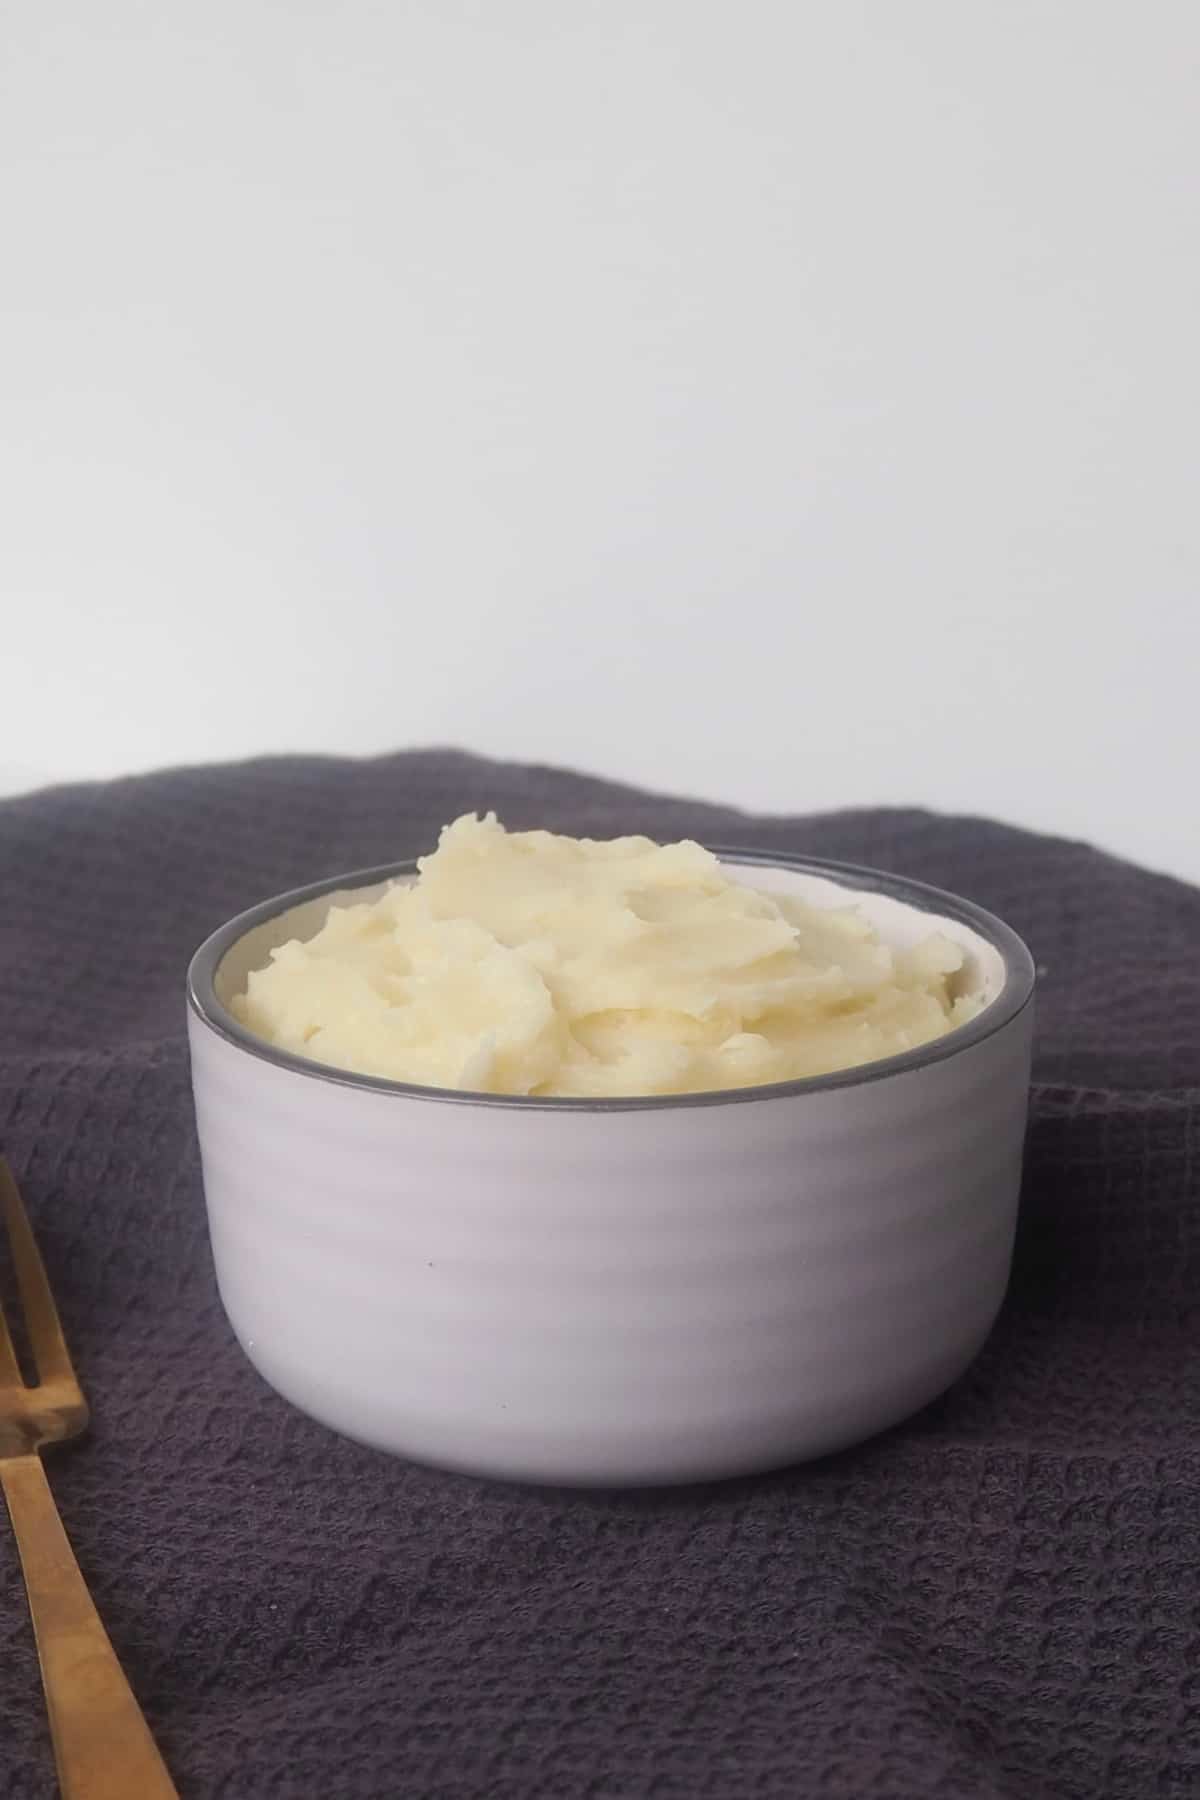 side view of mashed potatoes in a white bowl sitting on top of a dark grey towel.